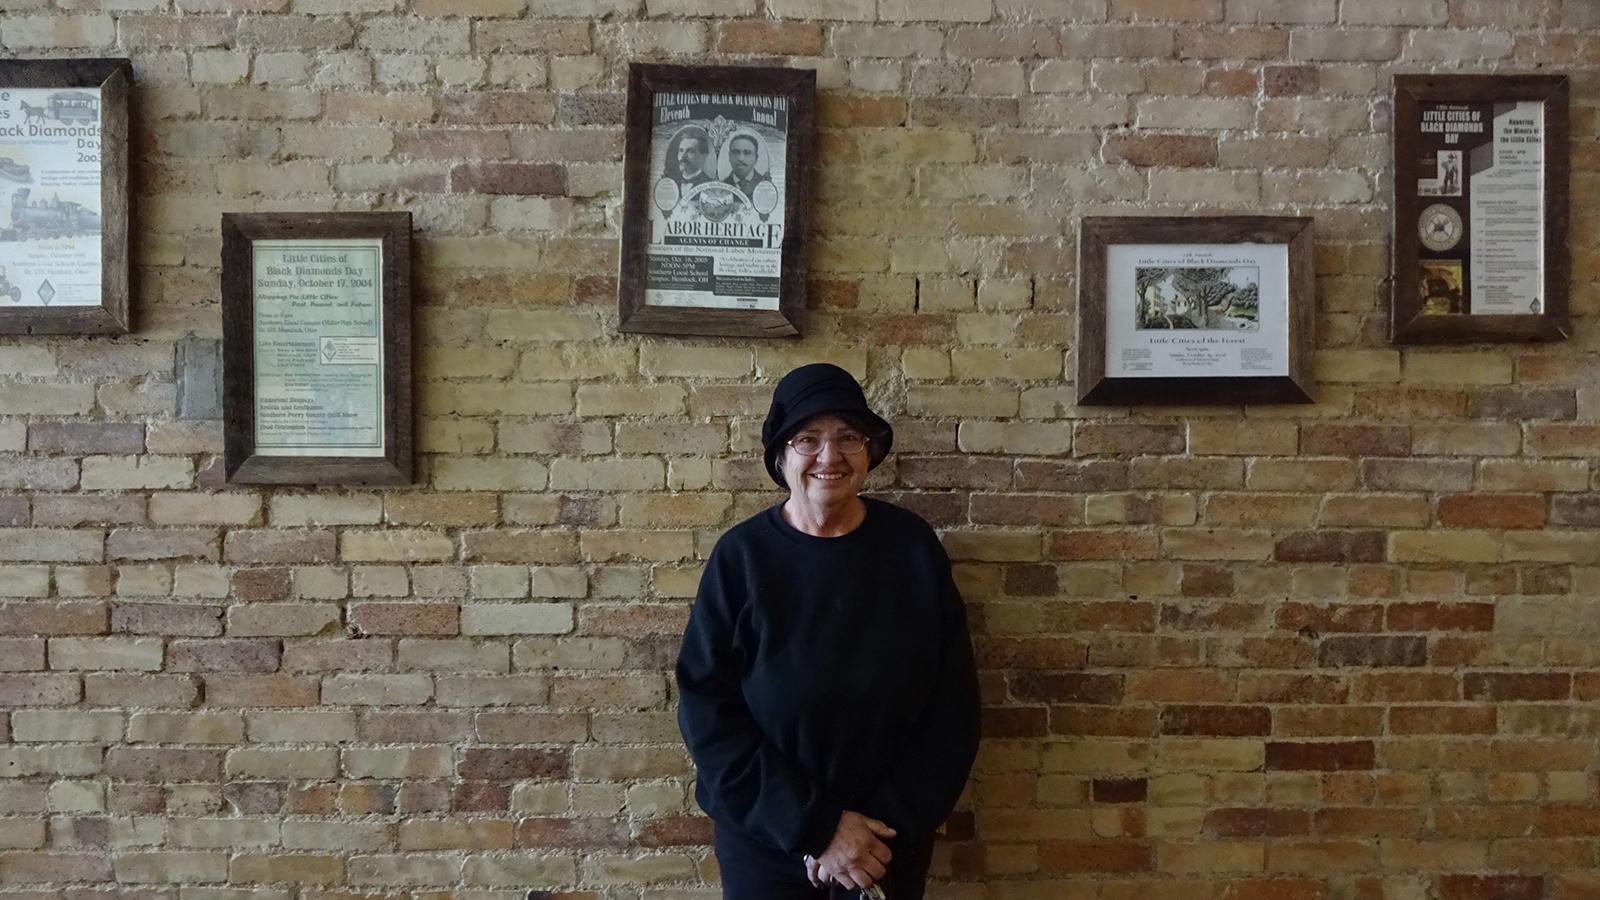 Cheryl Blosser pictured in the Tecumseh Theater amongst past Little Cities of Black Diamonds Day posters